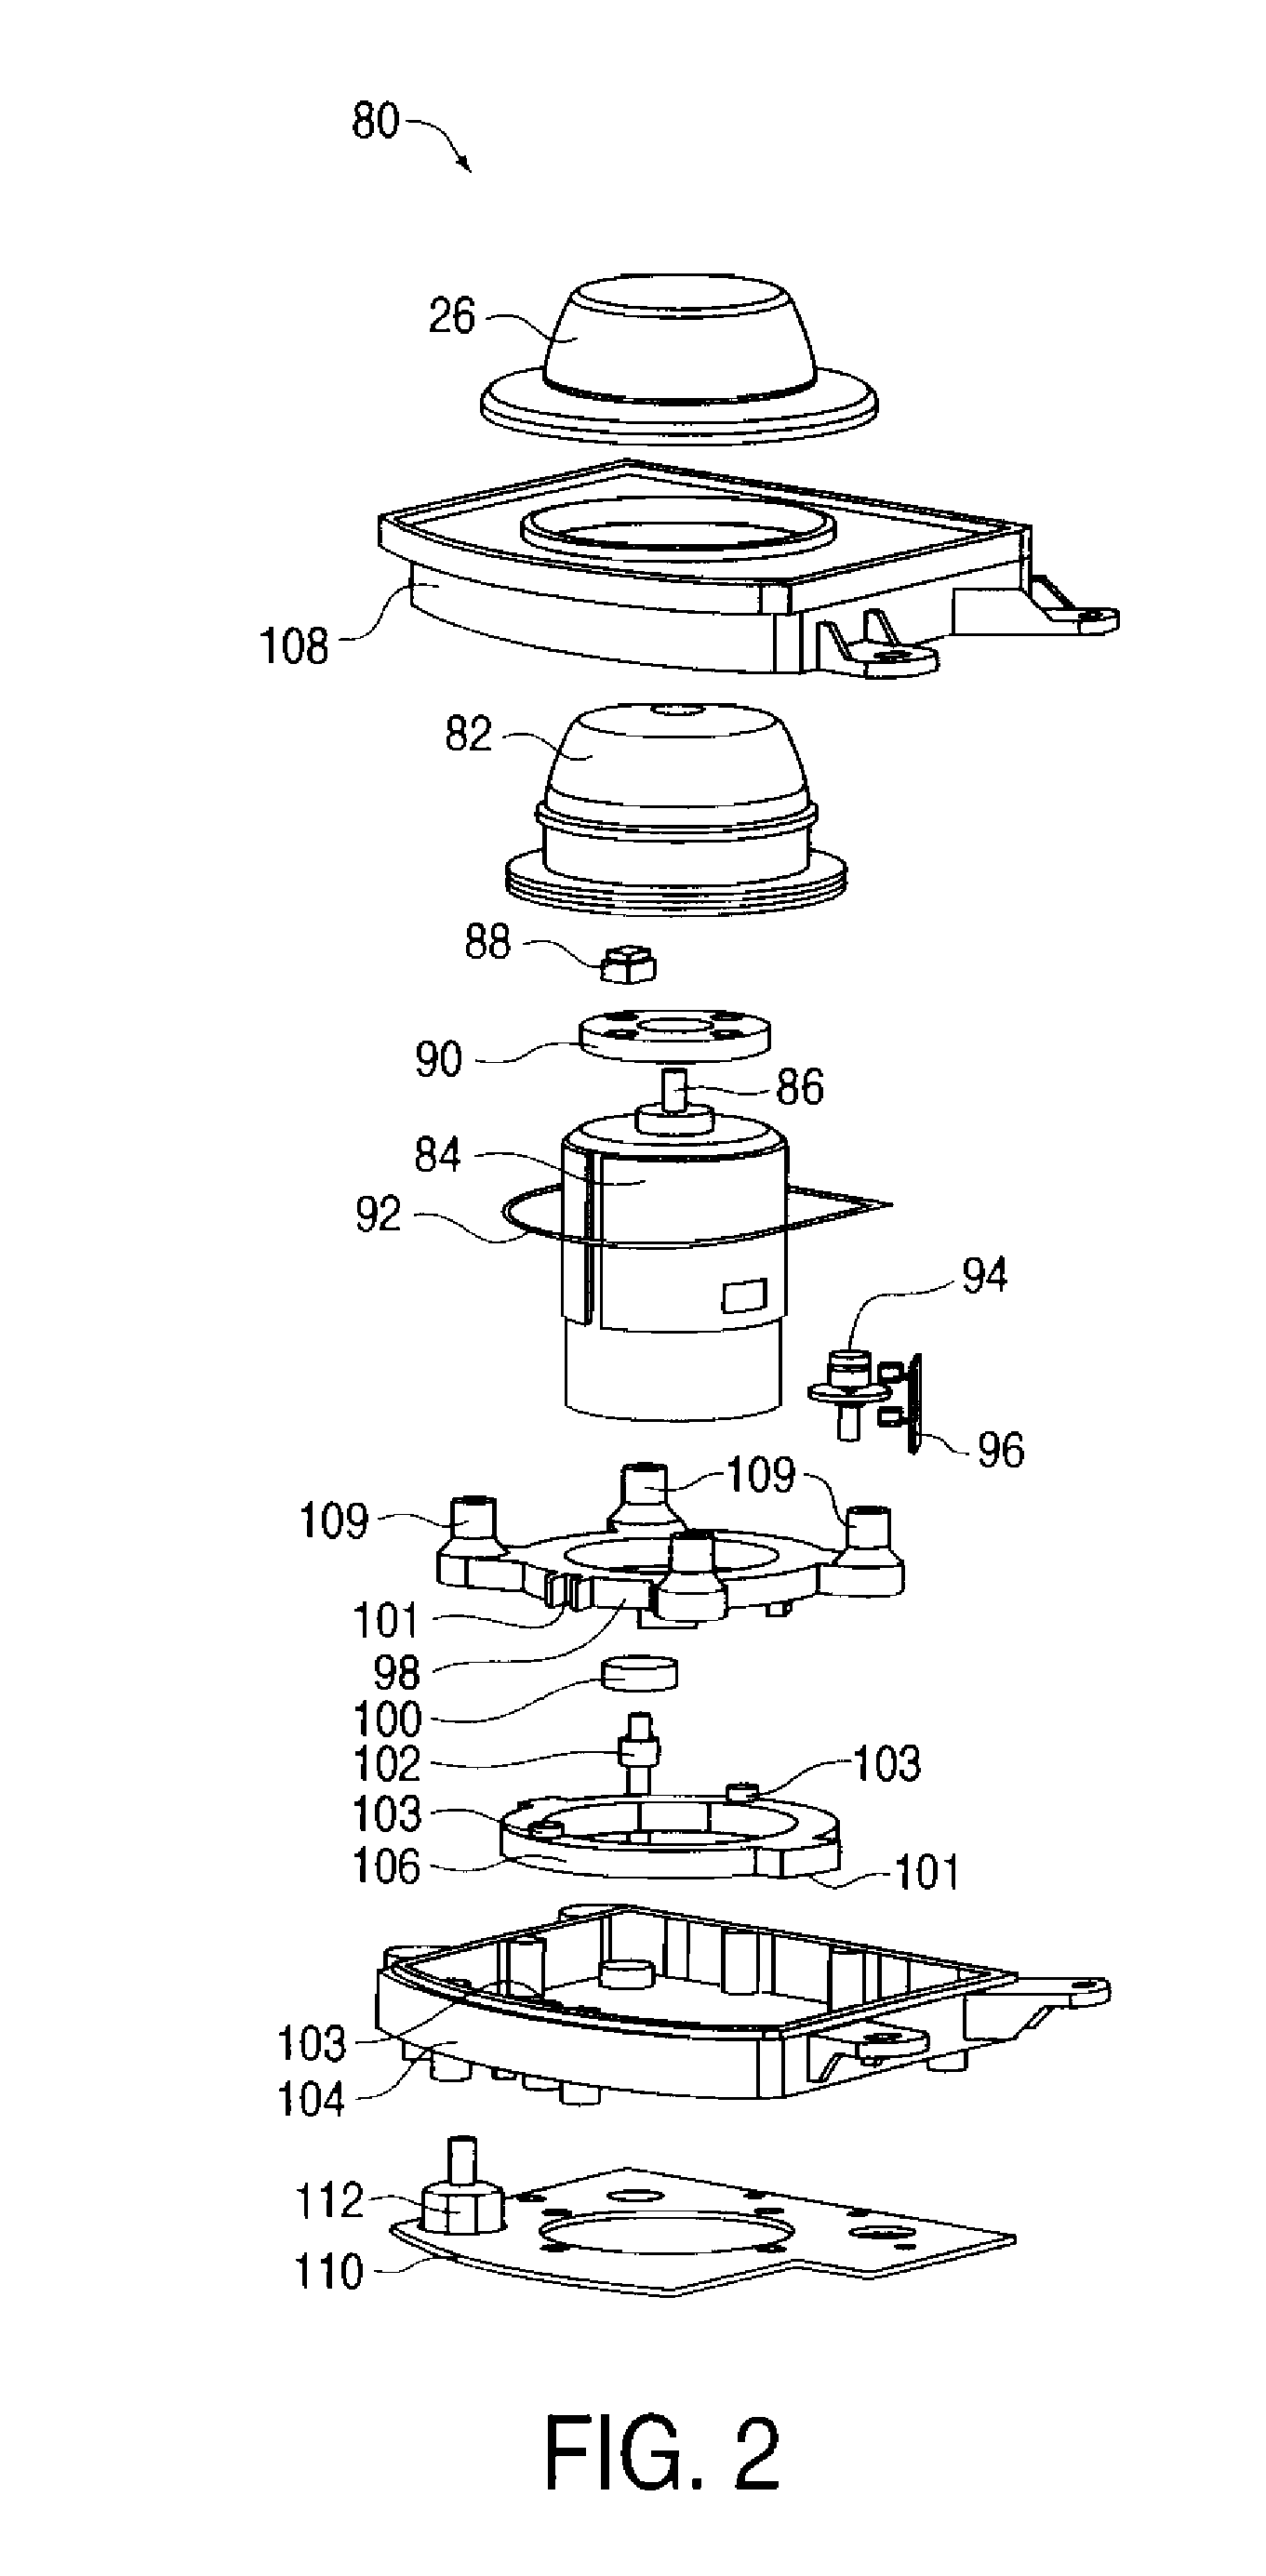 Systems and Methods for Haptic Feedback Effects for Control Knobs